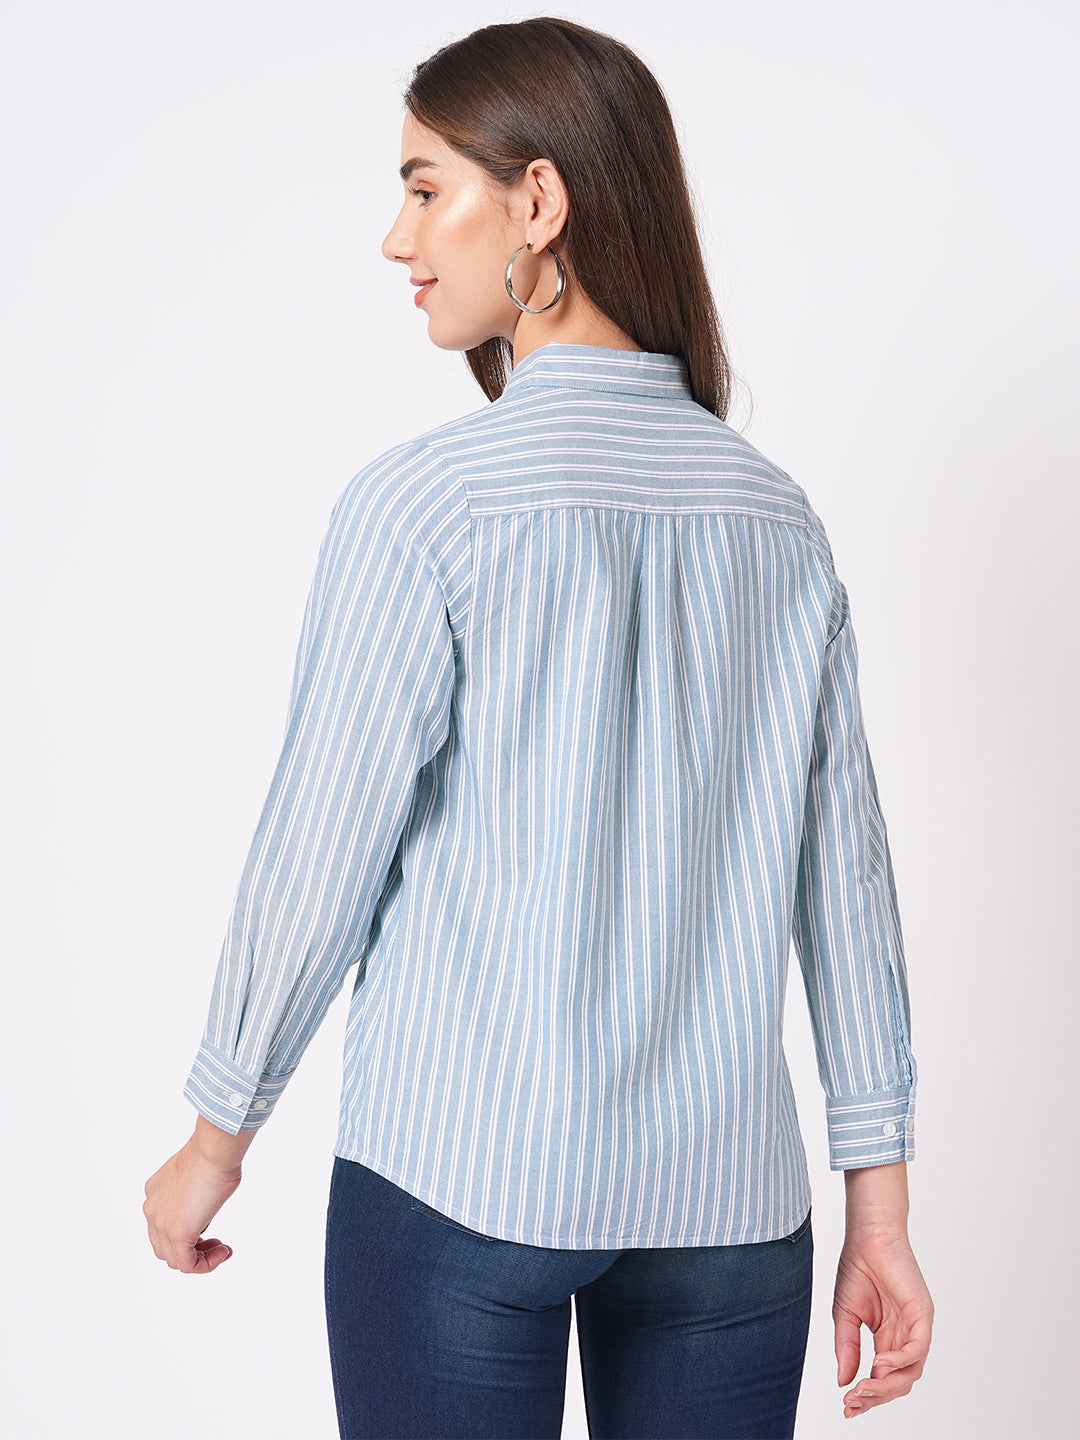 Bombay High Women's Premium Cotton Striped Relaxed Fit Shirt